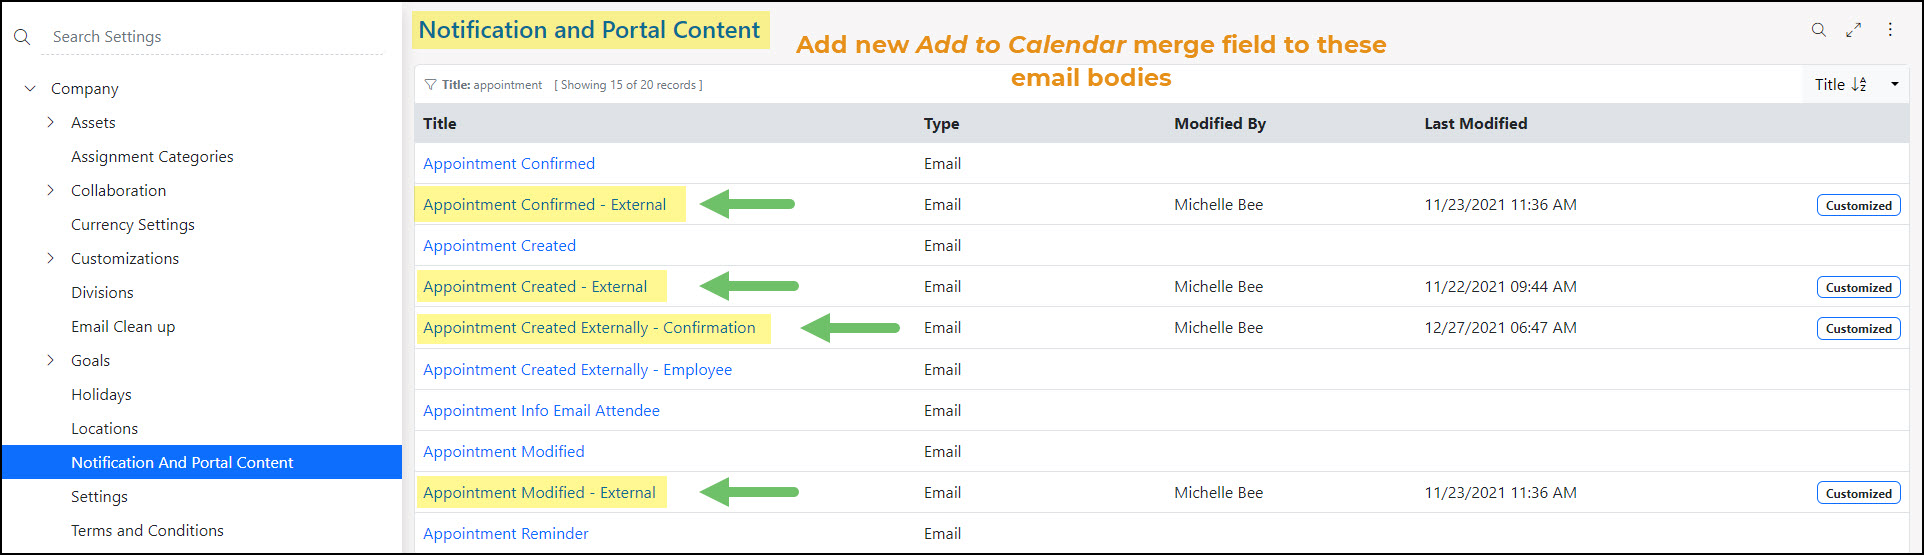 Example of which Notification and Portal content to add the Add to Calendar merge field to within Striven